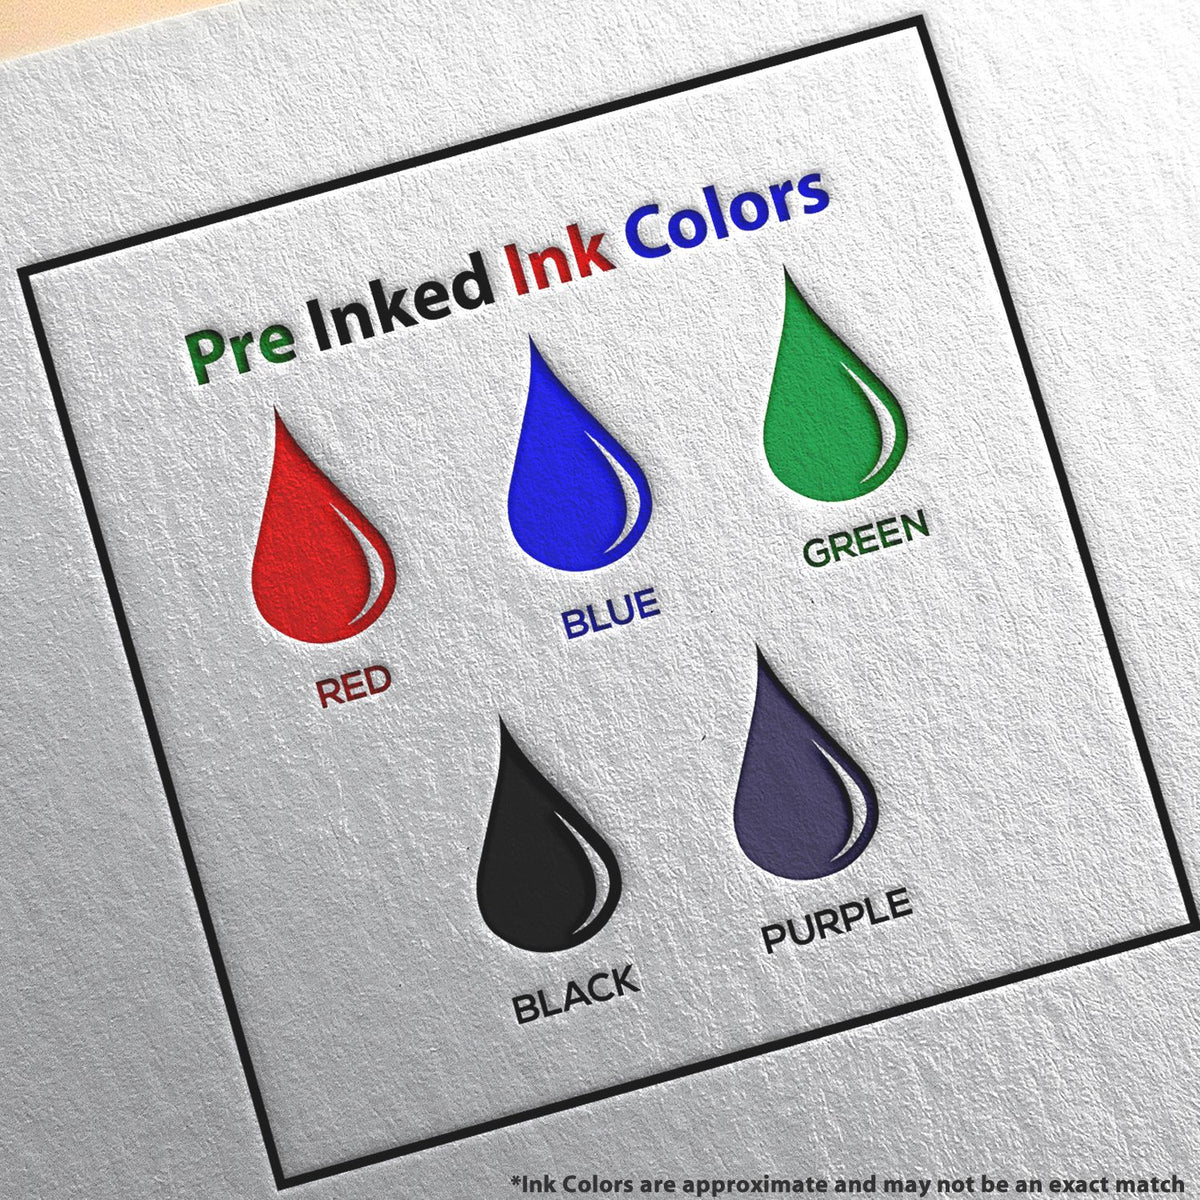 A picture showing the different ink colors or hues available for the MaxLight Premium Pre-Inked West Virginia State Seal Notarial Stamp product.